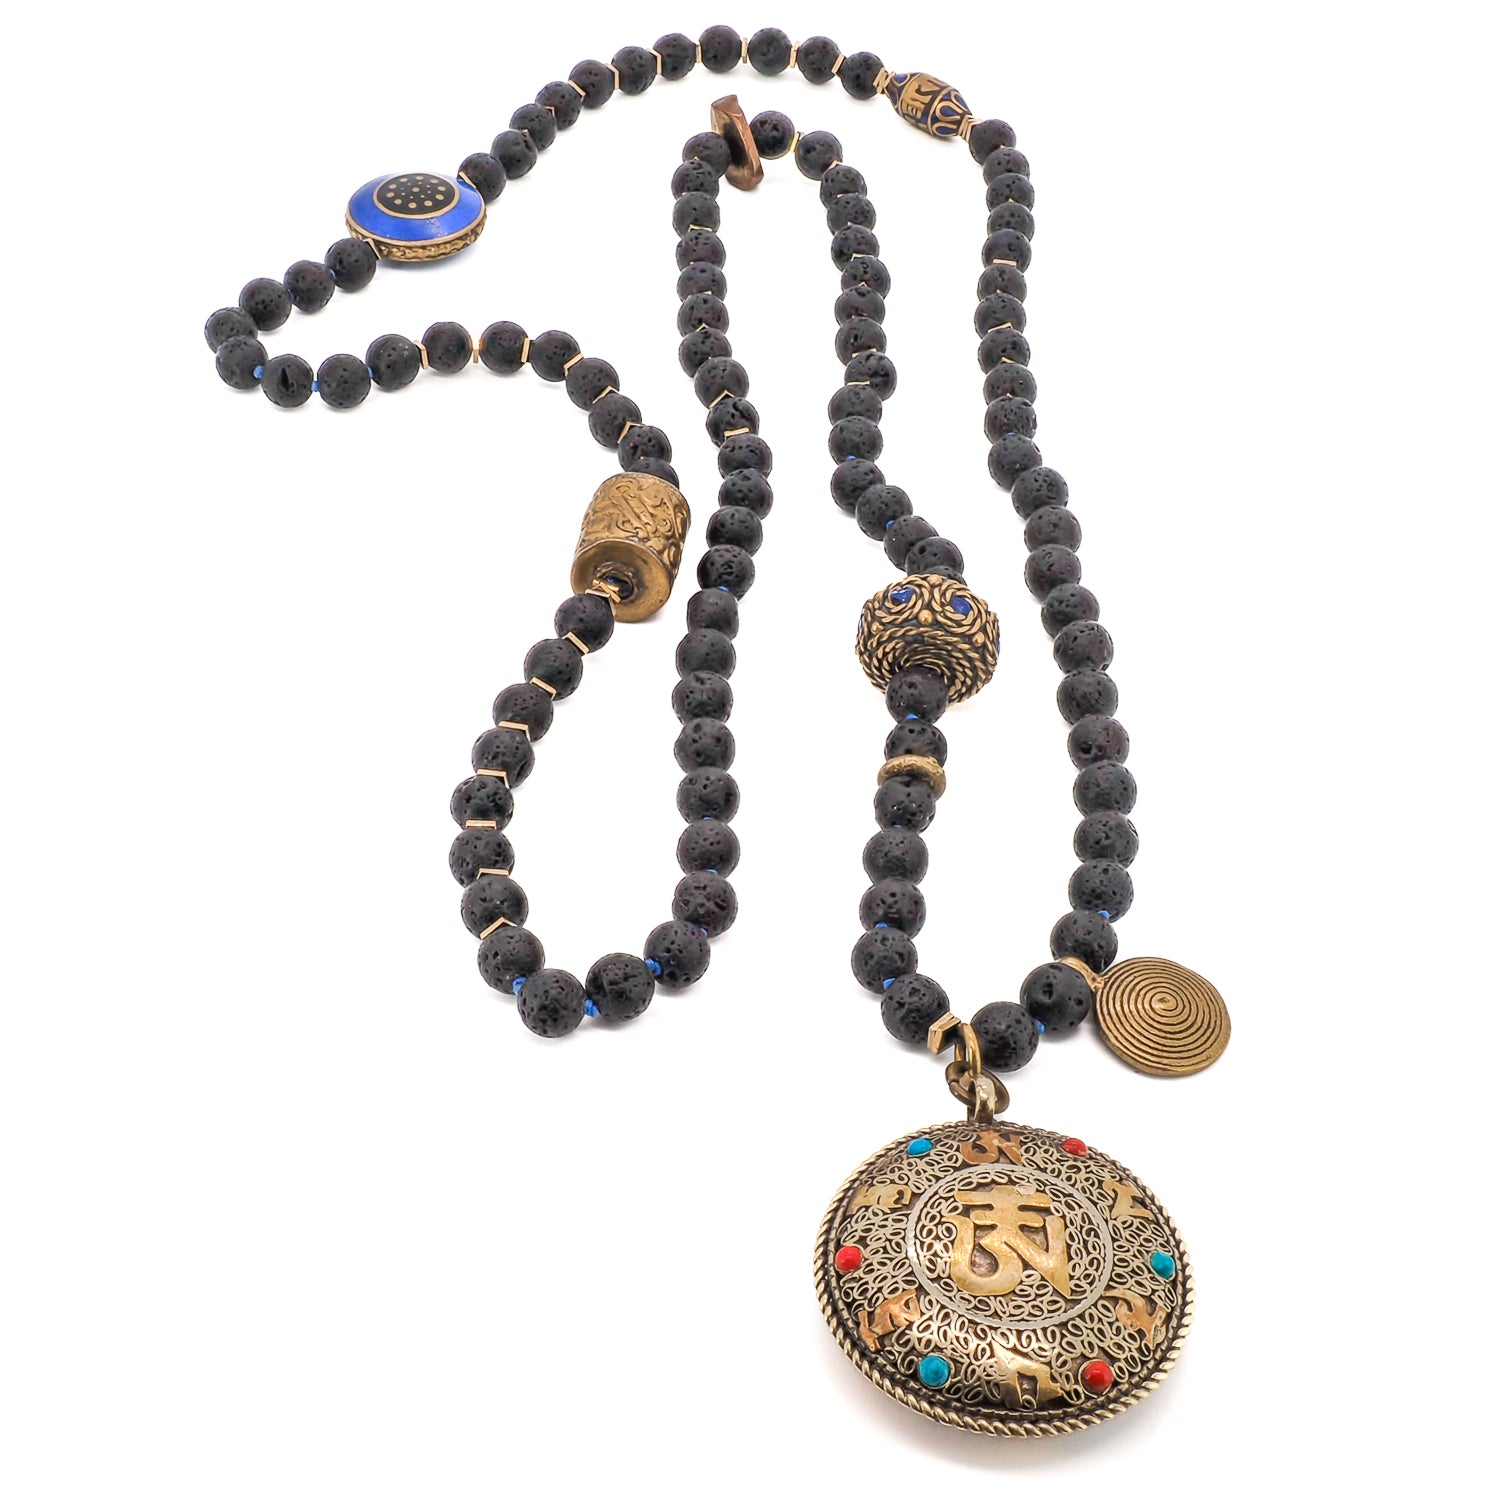 This "Black Nepal Om Mala Mantra Necklace" features a stunning brass handmade Nepal spiral charm and a large brass handmade Nepalese bead with lapis lazuli inlay.